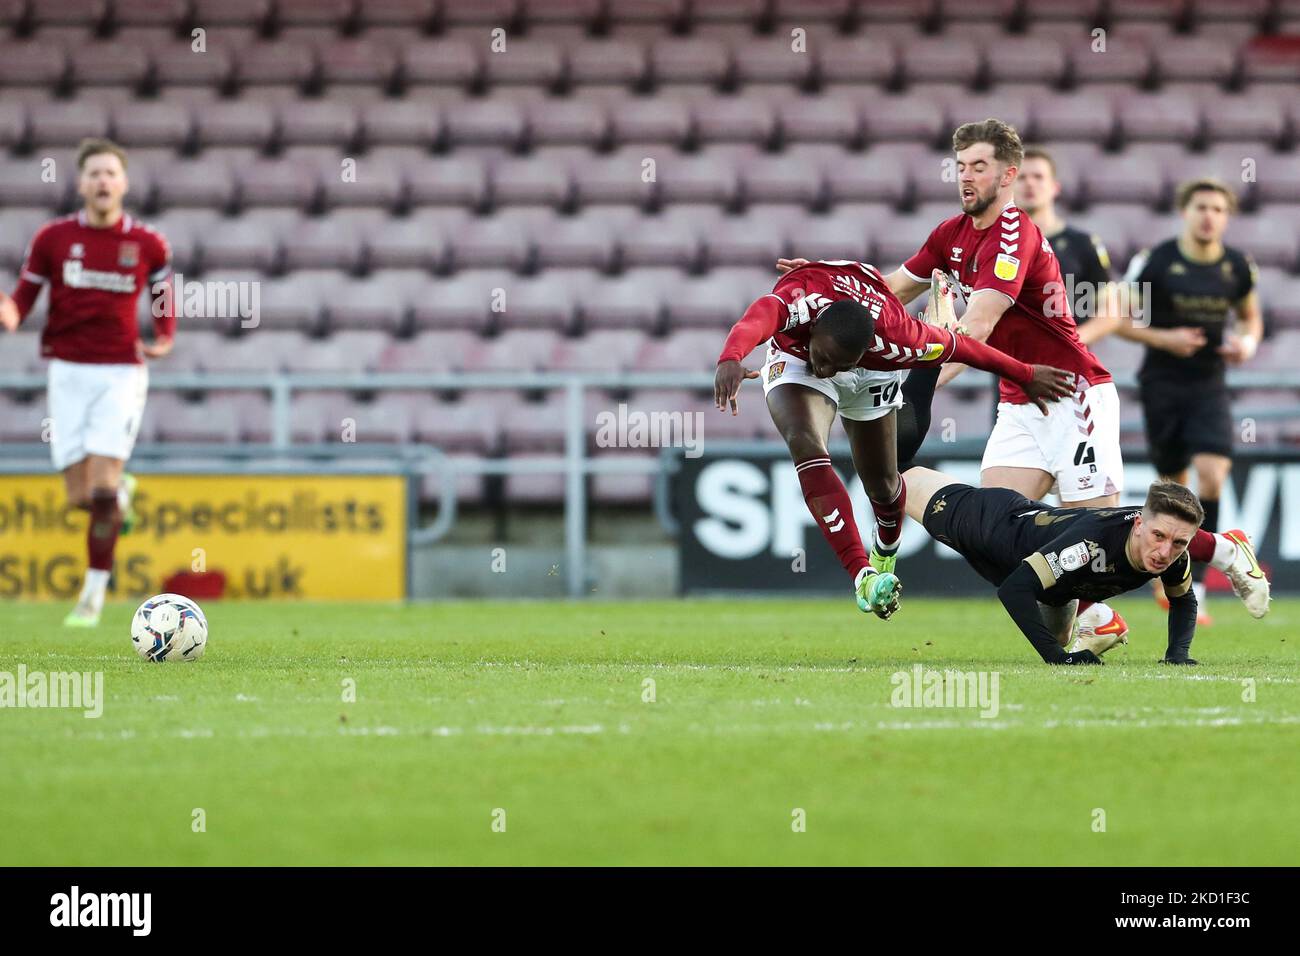 Northampton Town's Idris Kanu is challenged by Salford City's Ash Hunter during the second half of the Sky Bet League 2 match between Northampton Town and Salford City at the PTS Academy Stadium, Northampton on Saturday 29th January 2022. (Photo by John Cripps/MI News/NurPhoto) Stock Photo